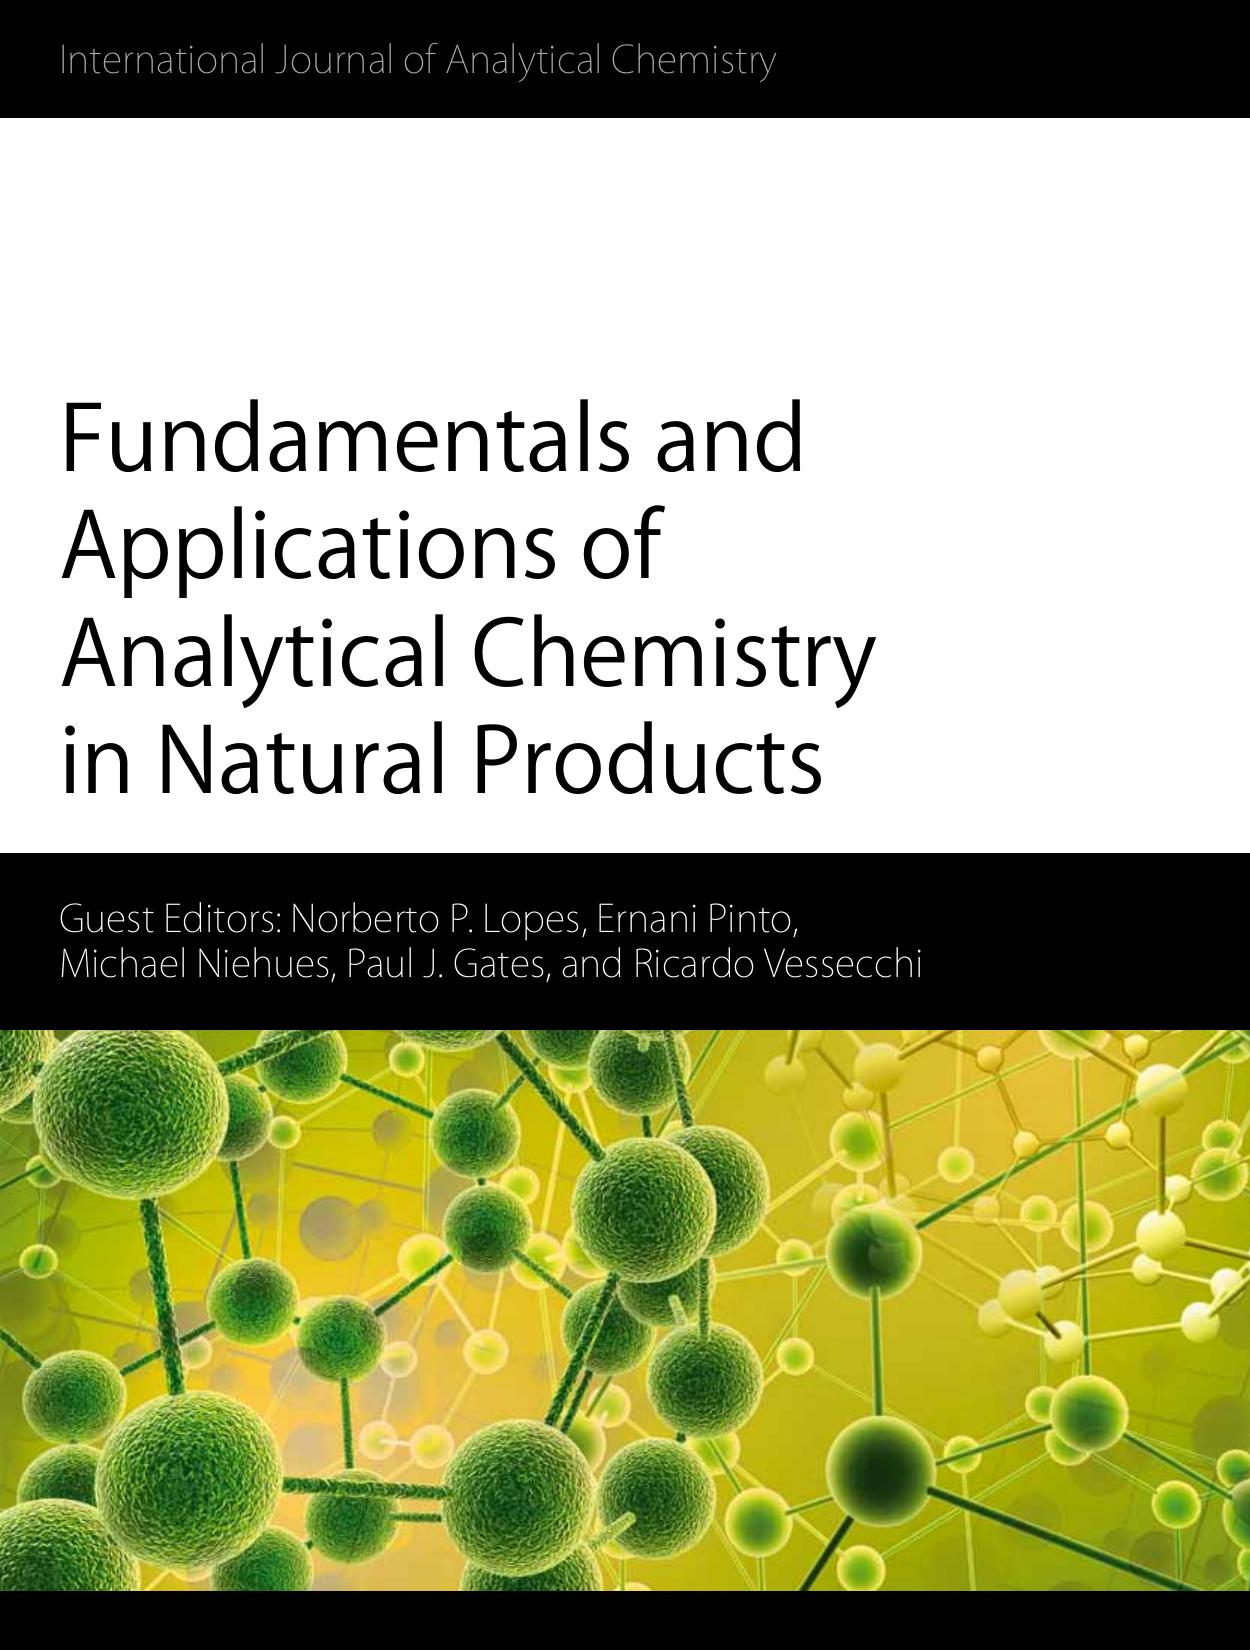 Fundamentals and Applications of Analytical Chemistry in Natural Products 2012